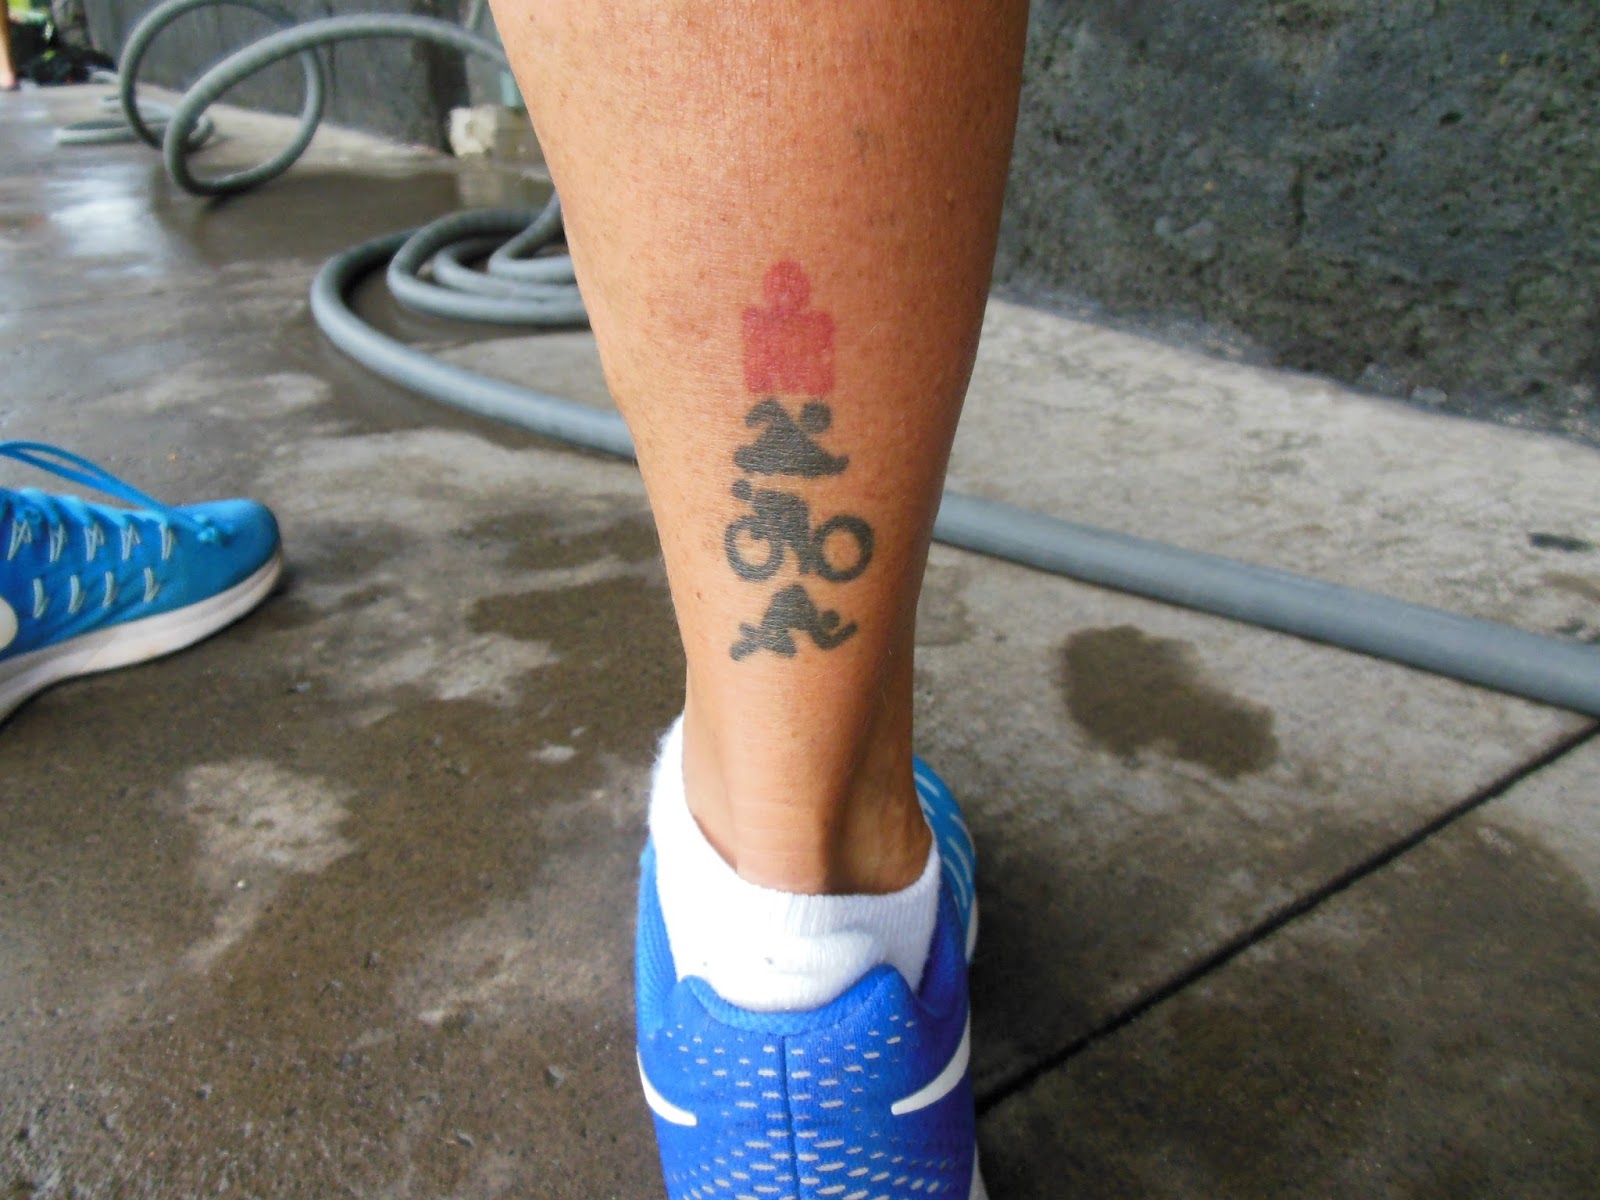 Thinking About an Ironman Tattoo? This May Help